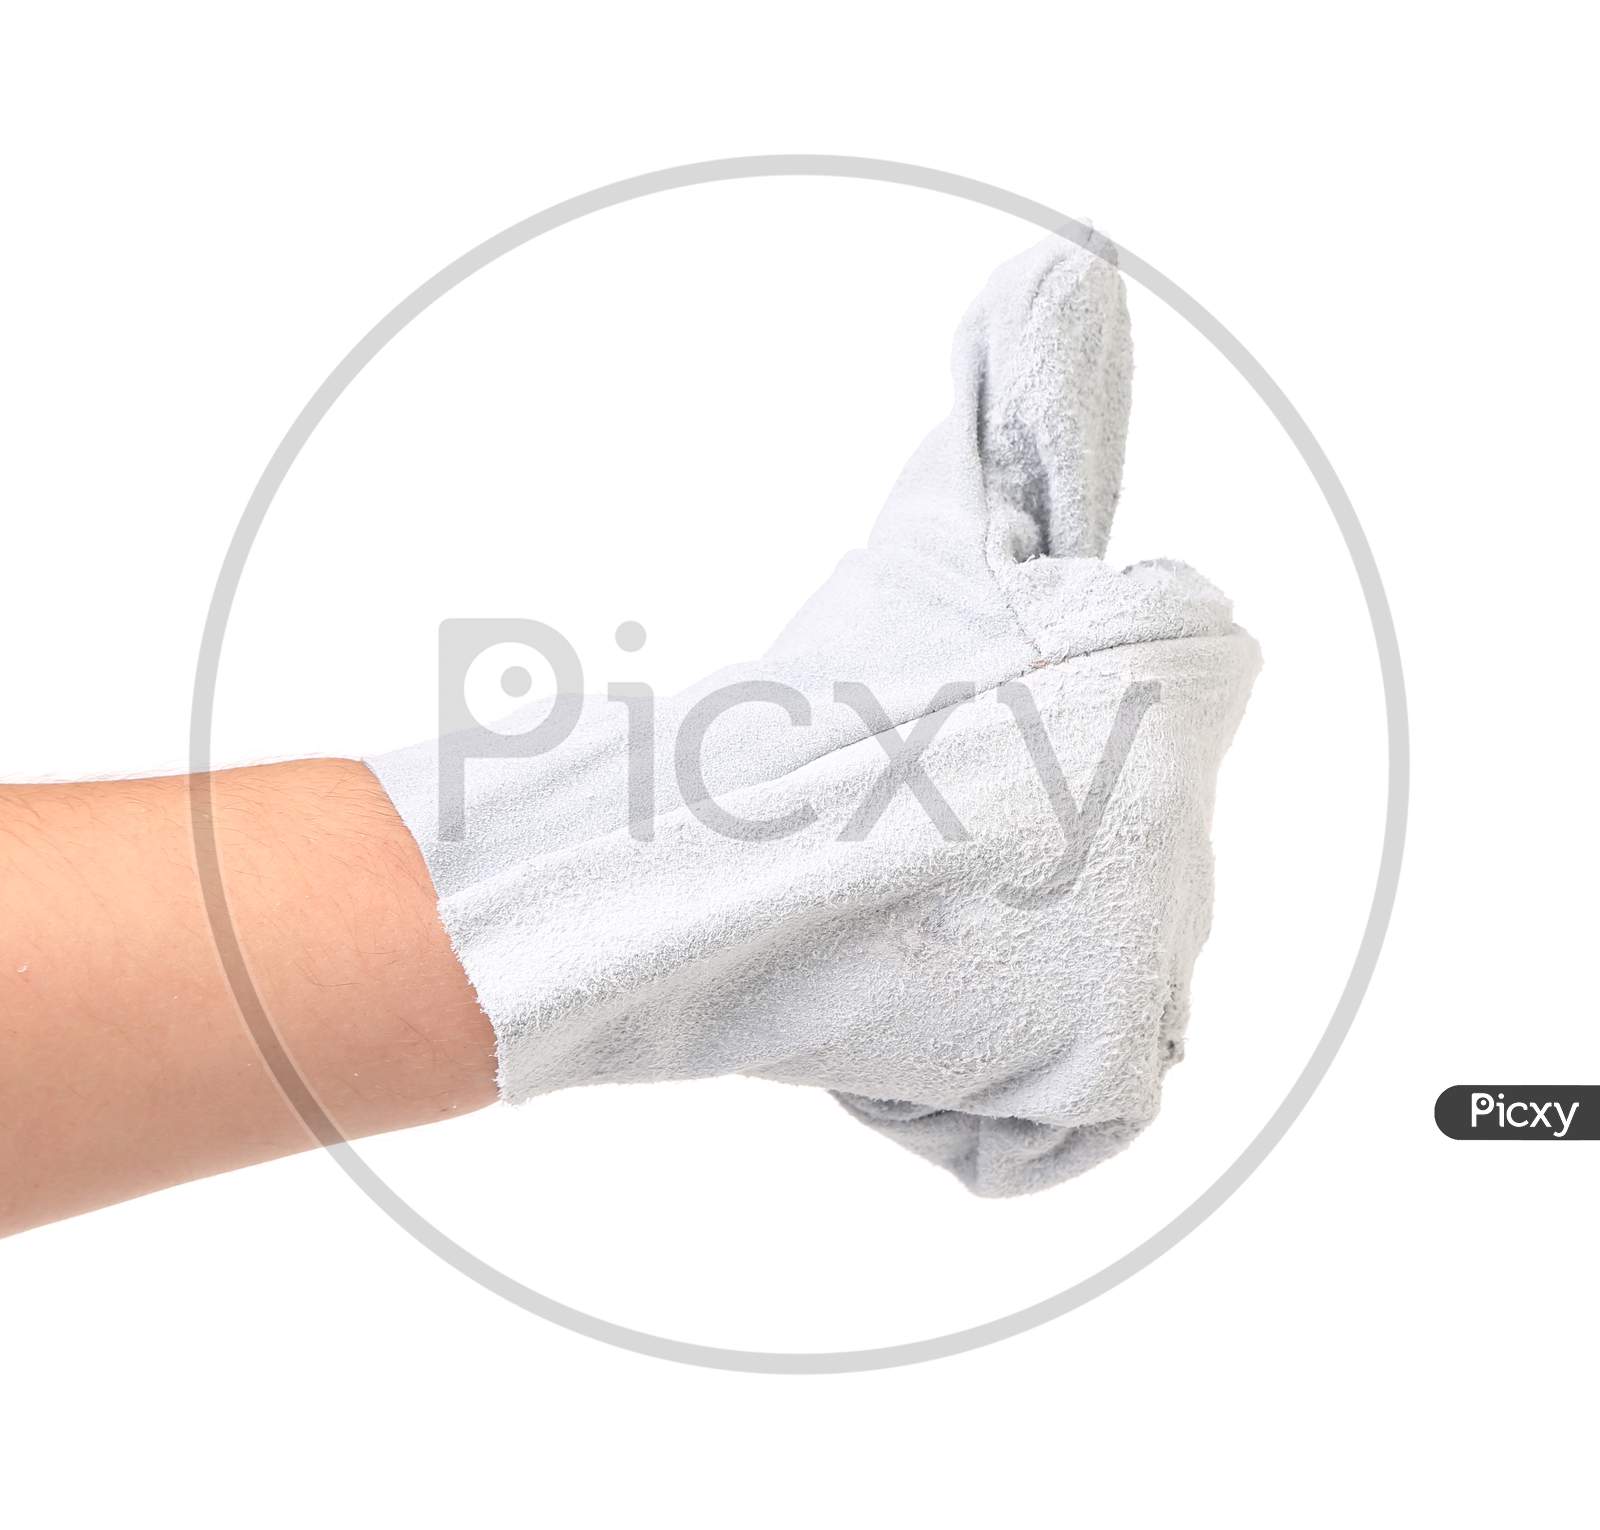 White Mittens On Hand. Isolated On A White Background.